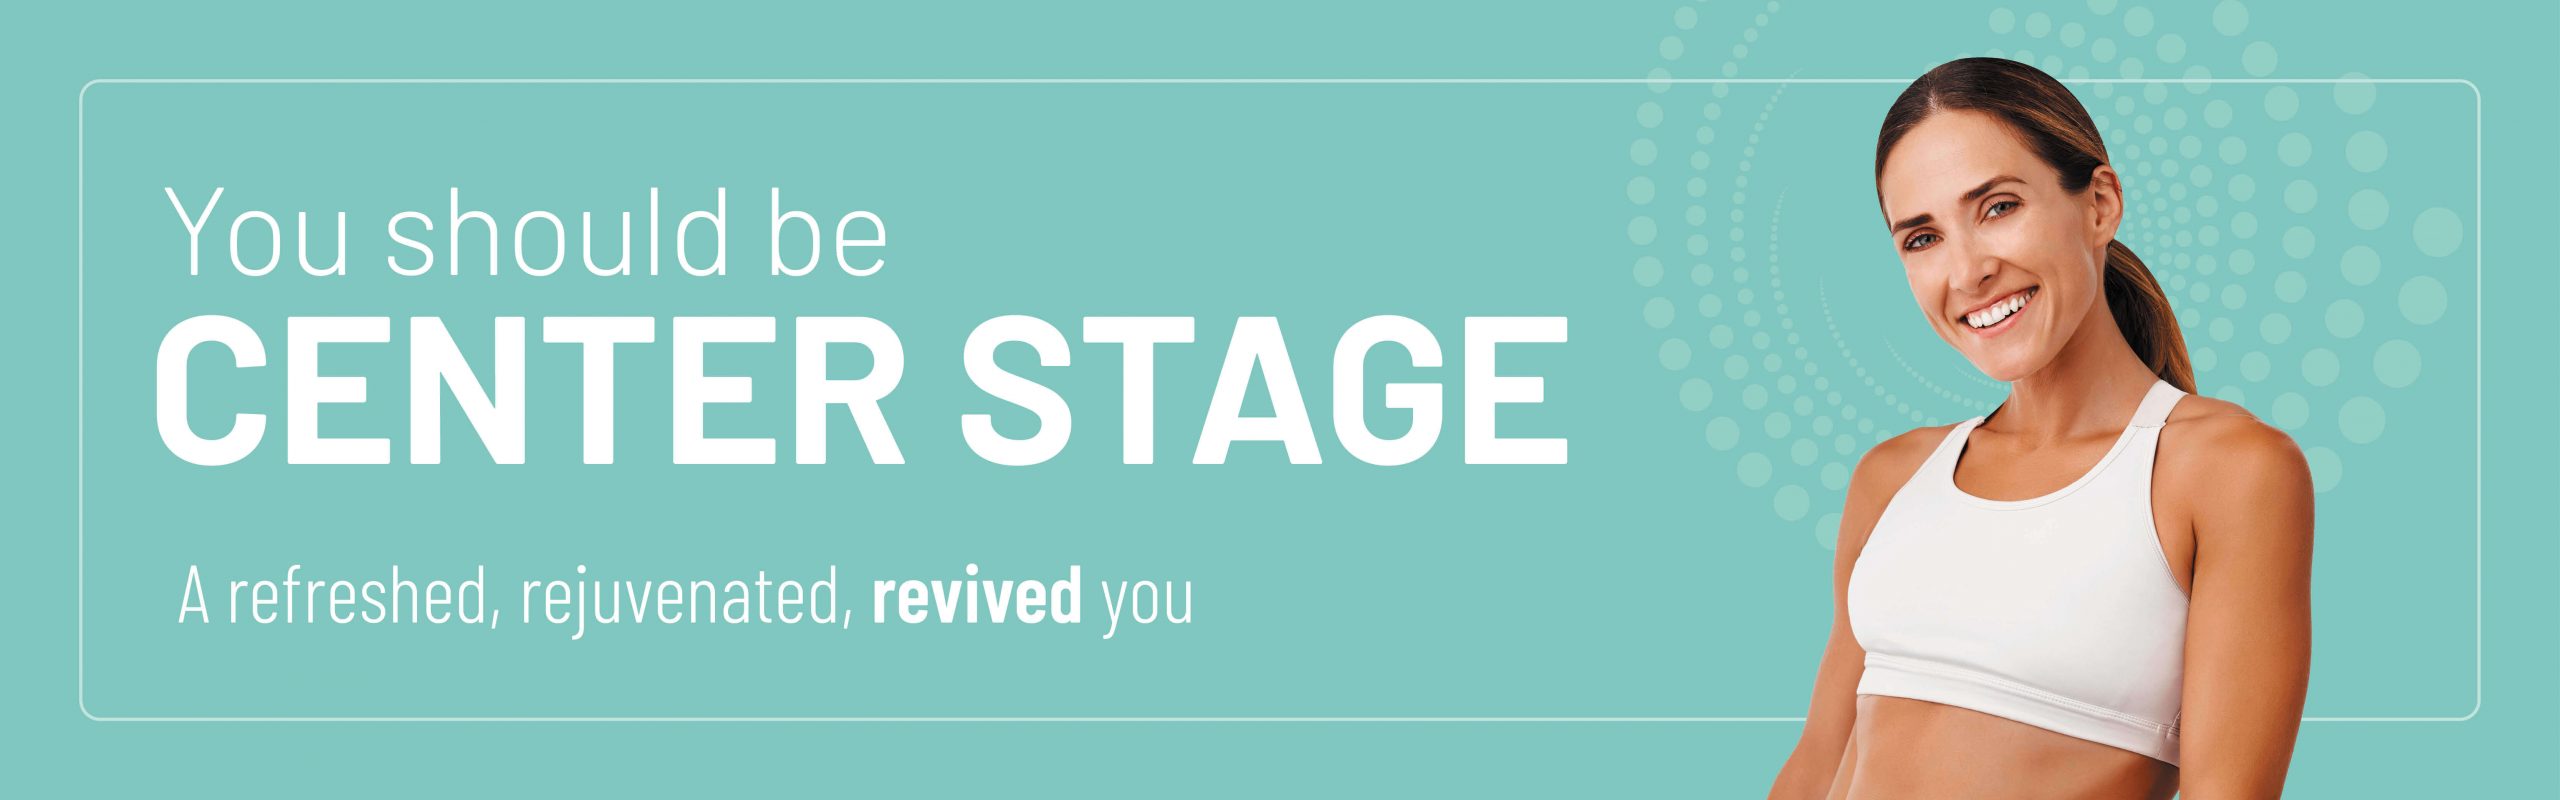 Be Center Stage at Revive Medical Spa, LLC